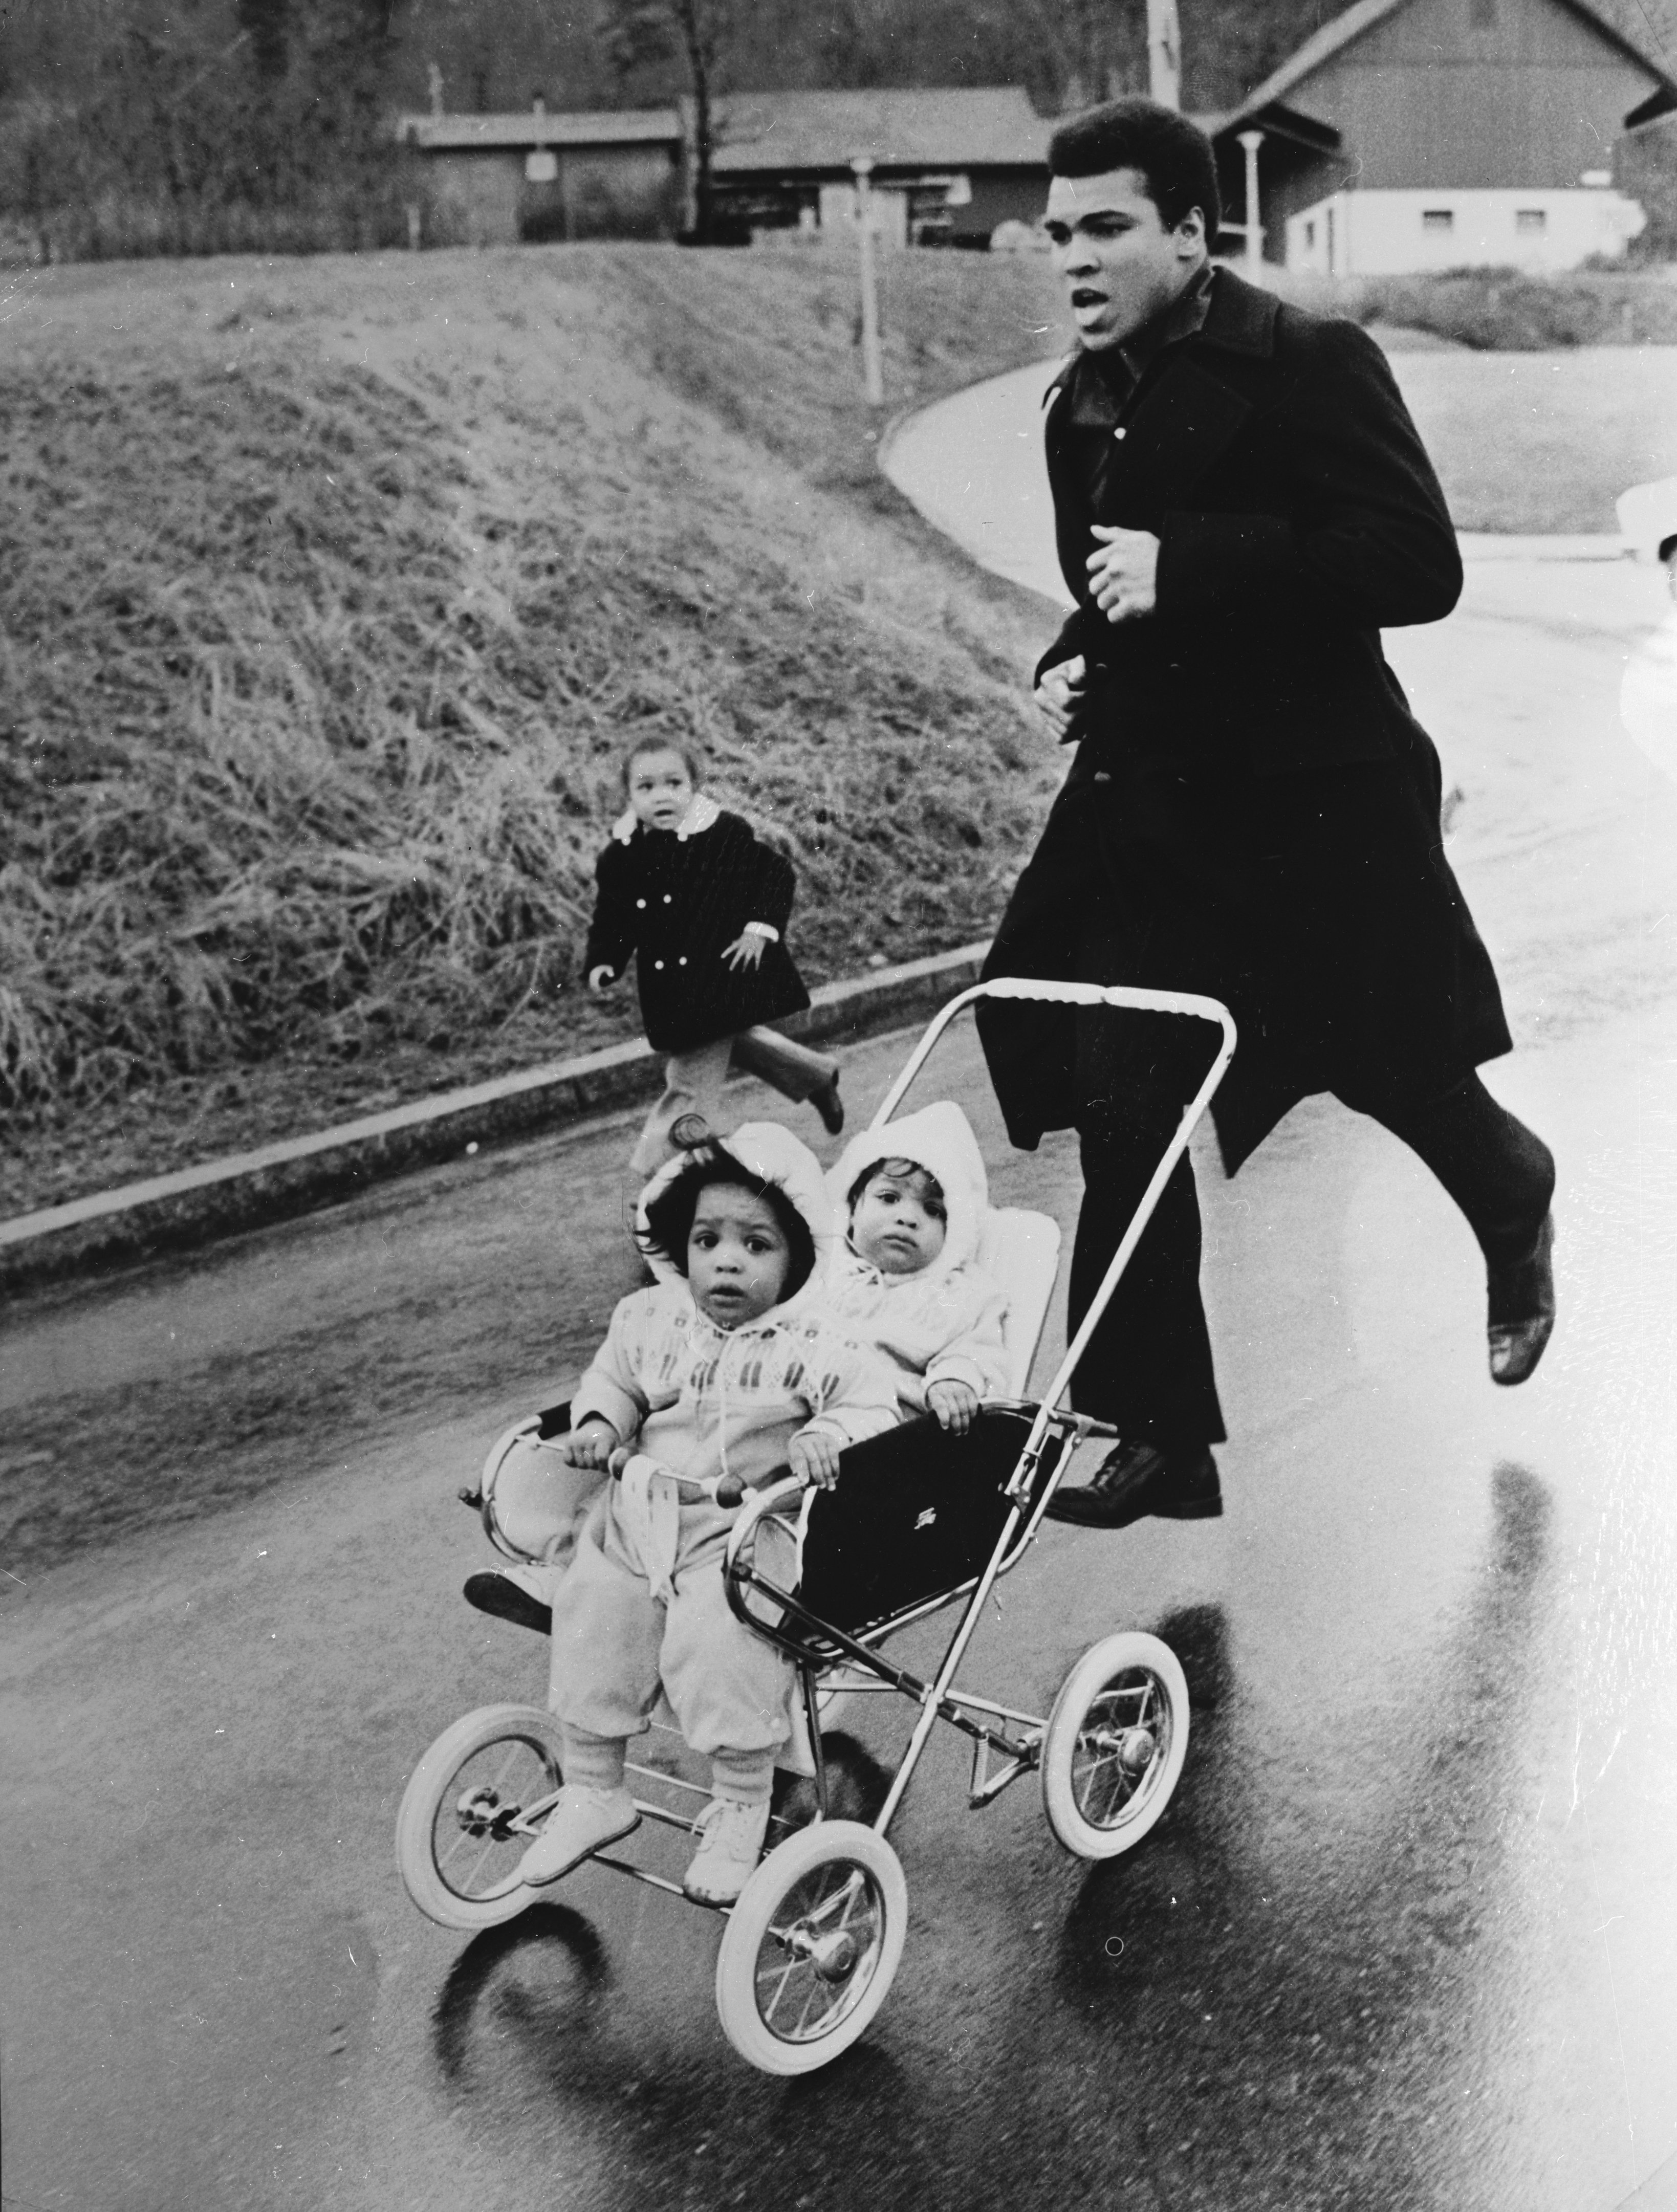  Ali training in Zurich for a fight with his twin daughters Jamillah and Rasheda